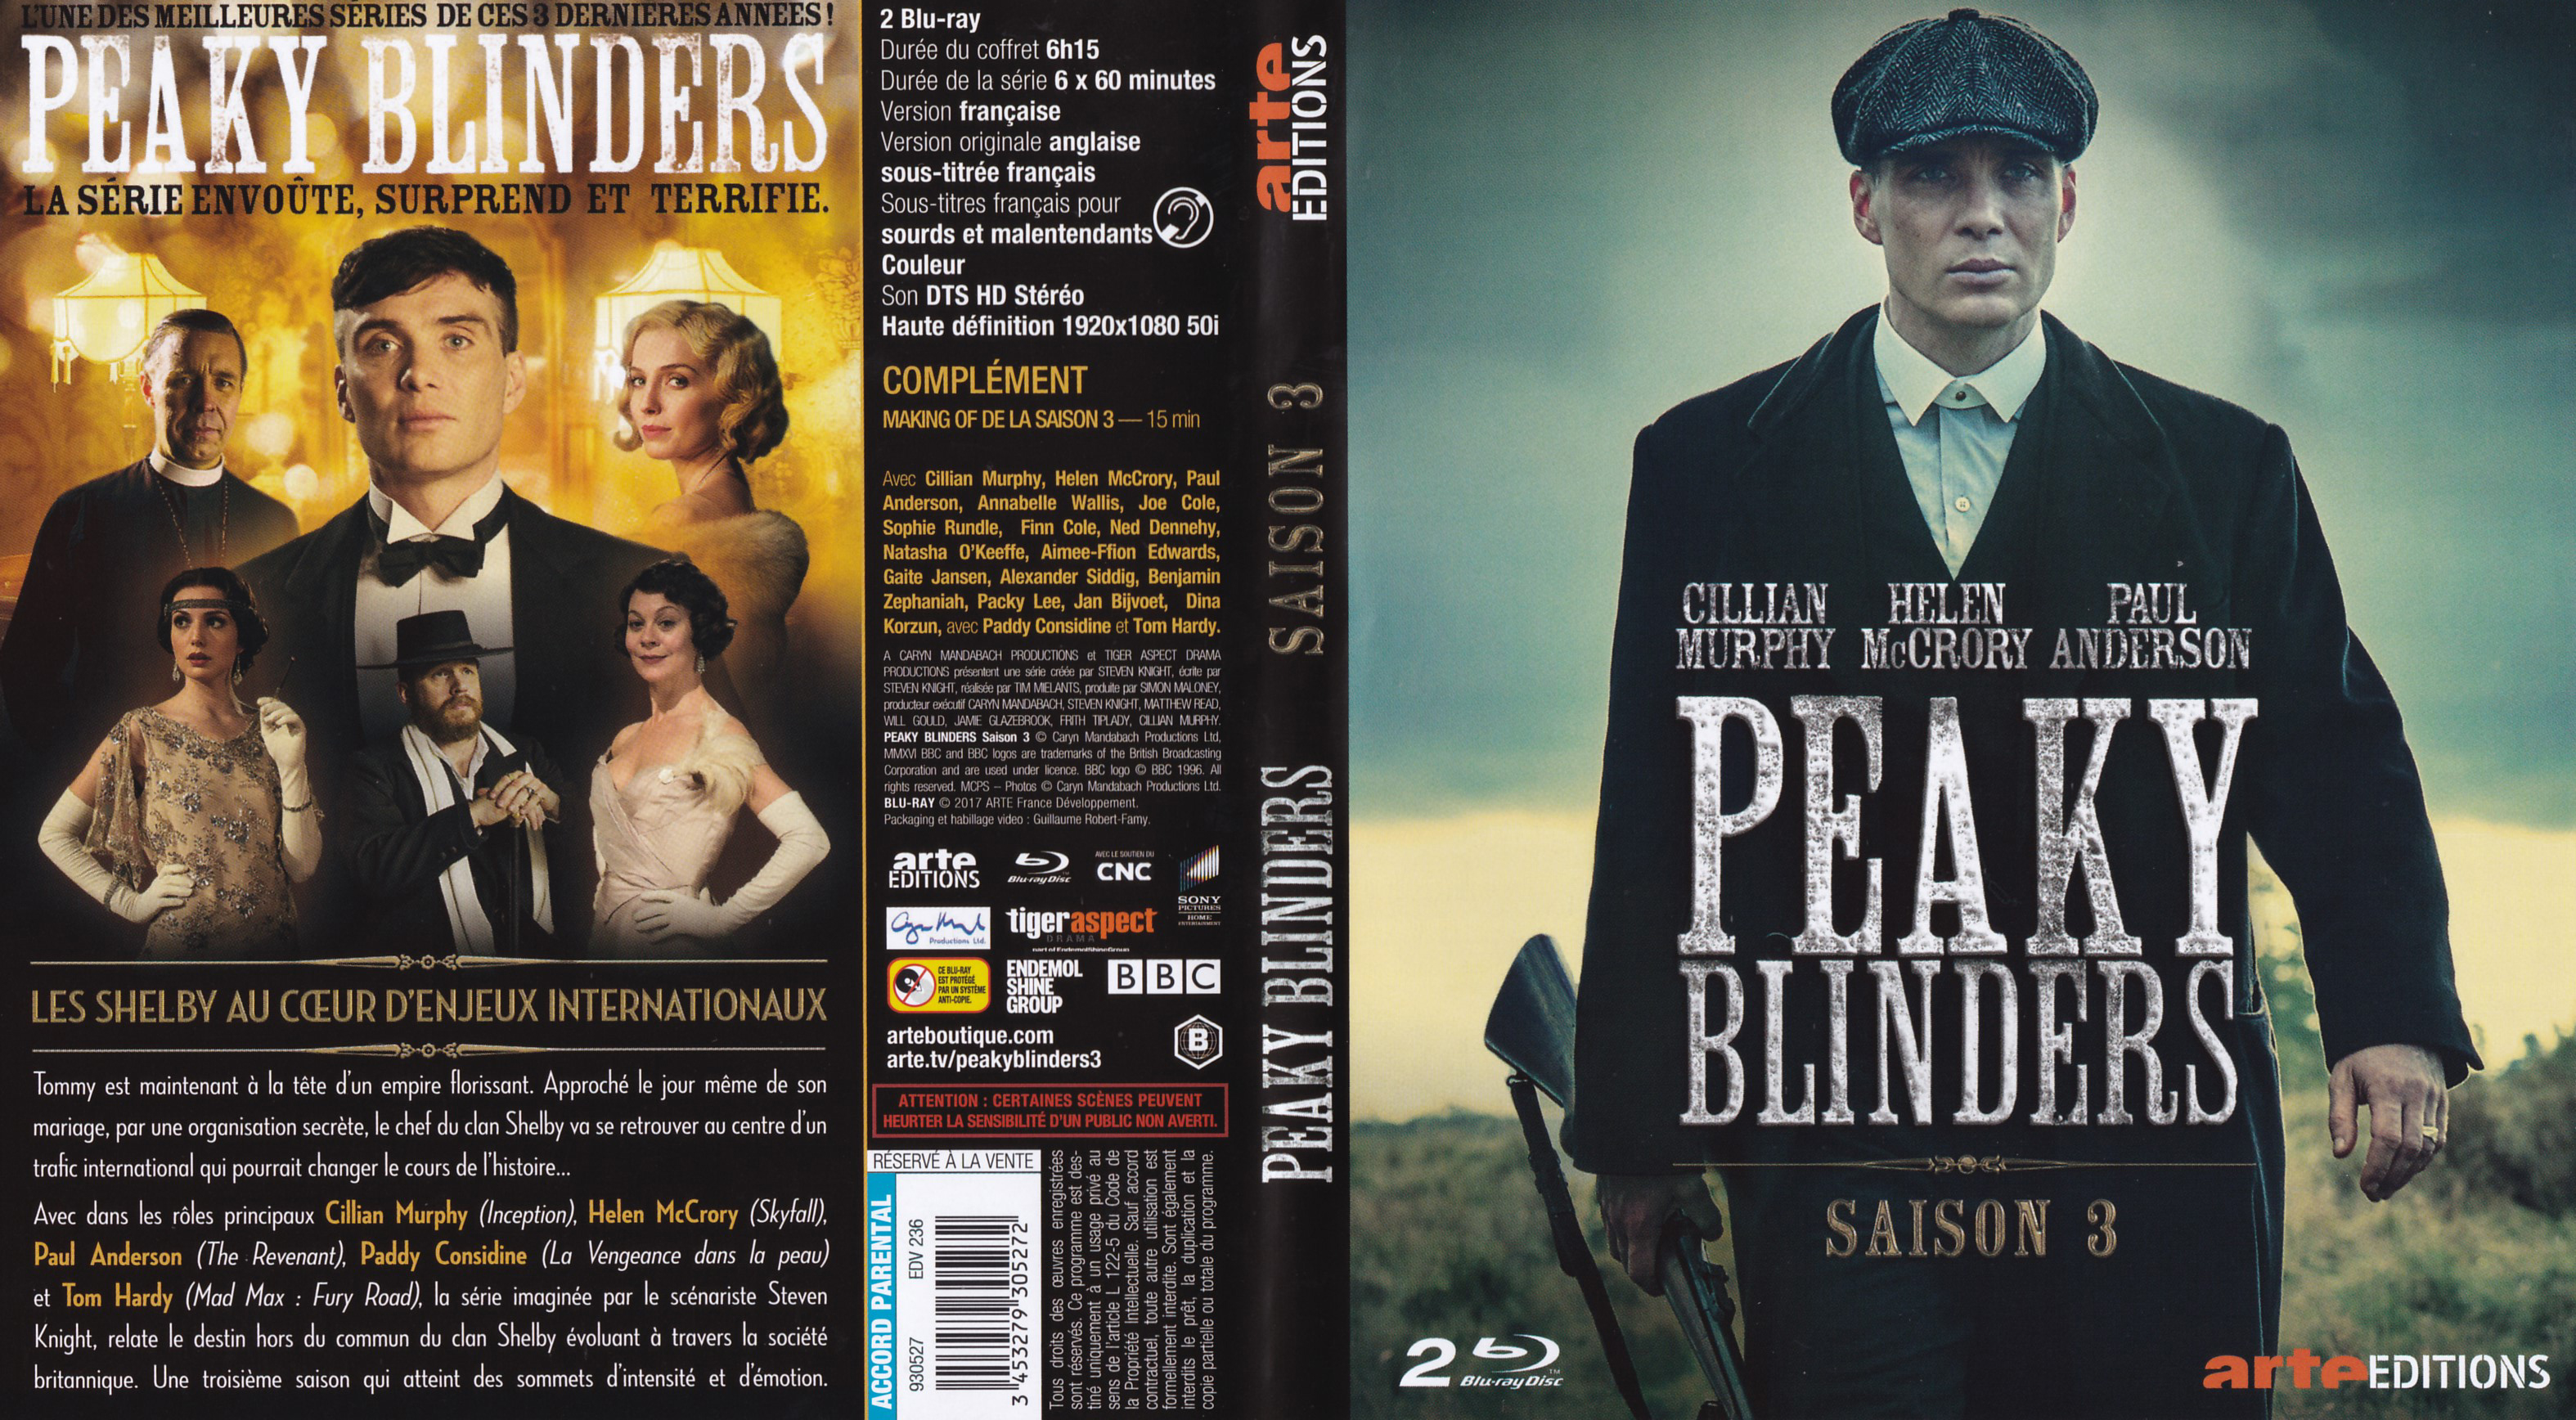 Jaquette DVD Peaky blinders Saison 3 (BLU-RAY)